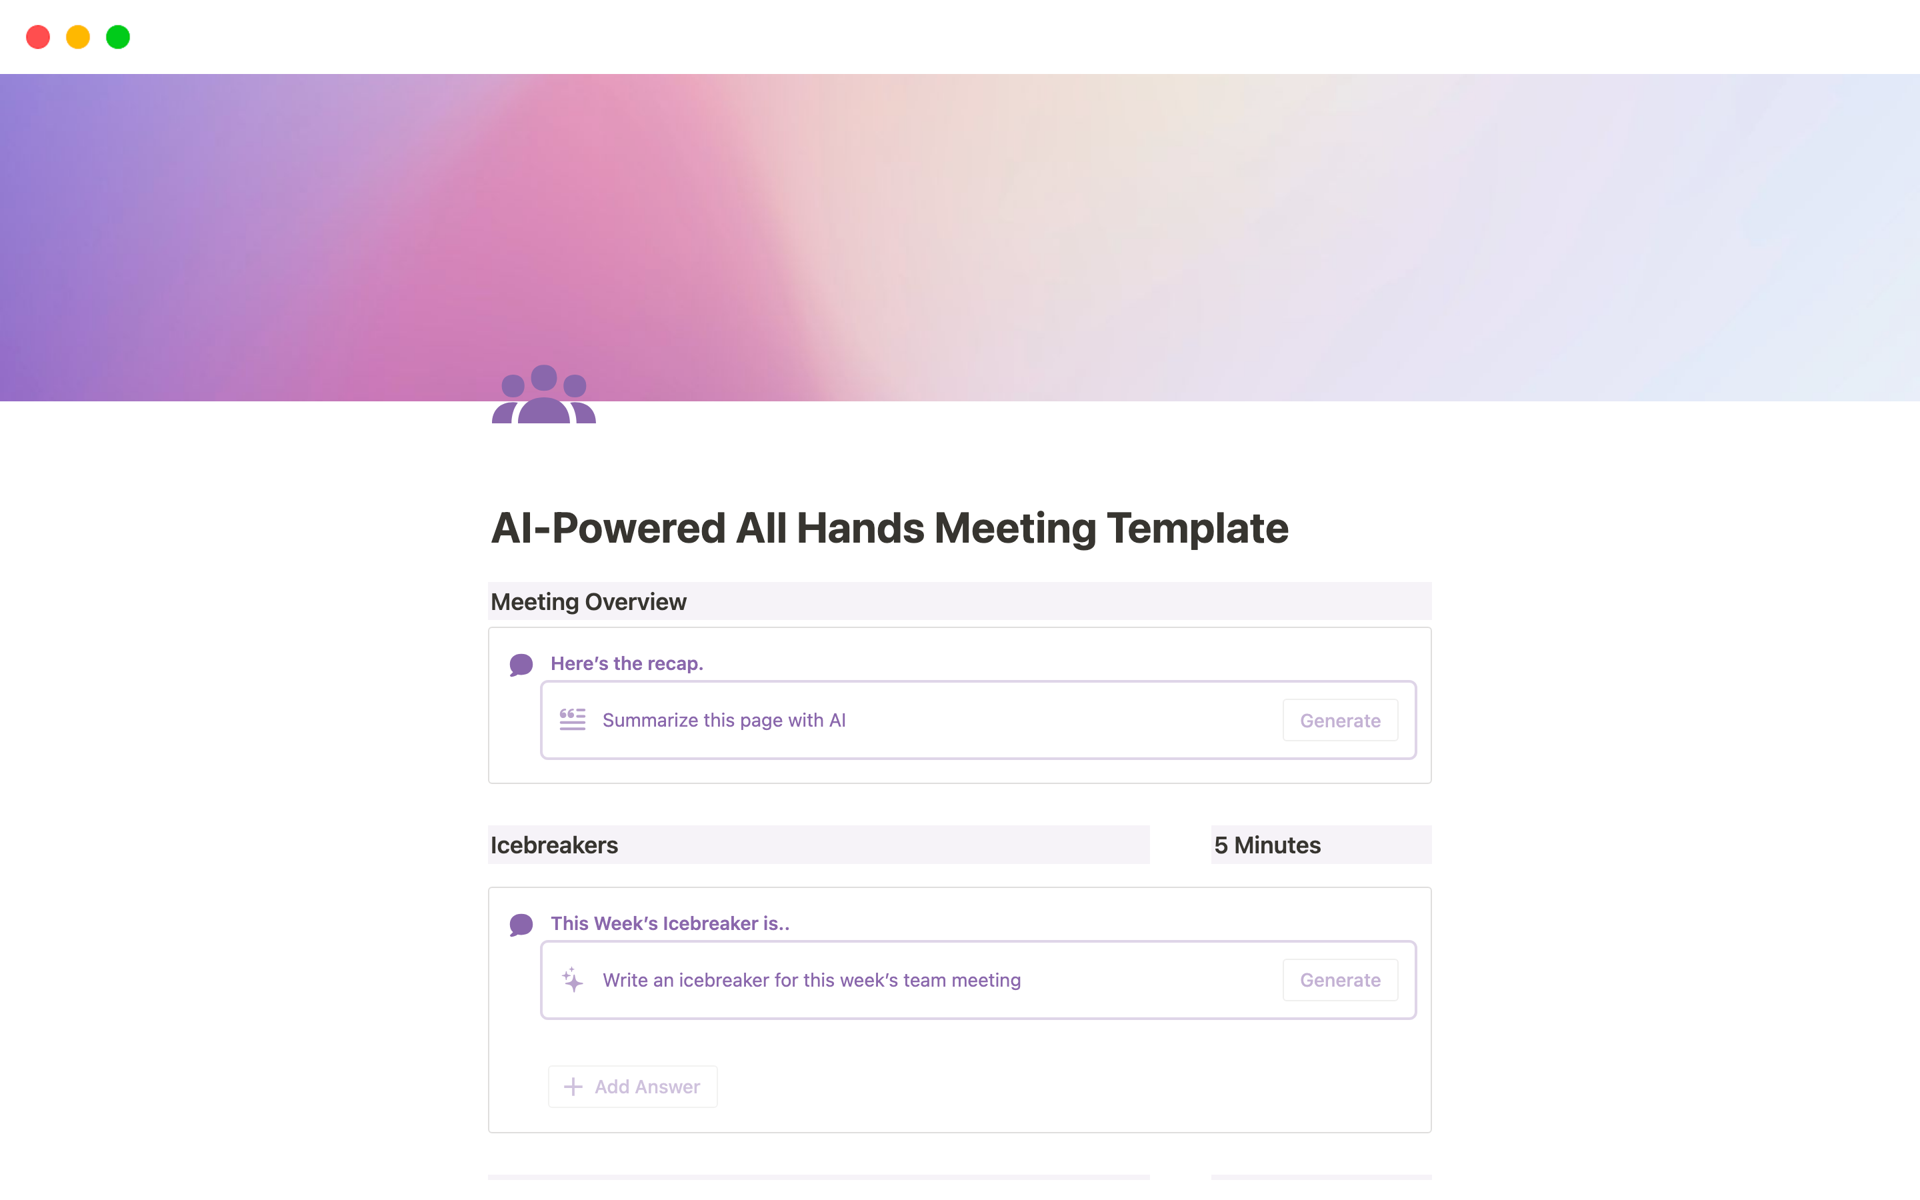 Provides AI-enabled All Hands Meetings with ice breaker generation, capturing action items and summarising meeting notes all under a single, delightful user experience.